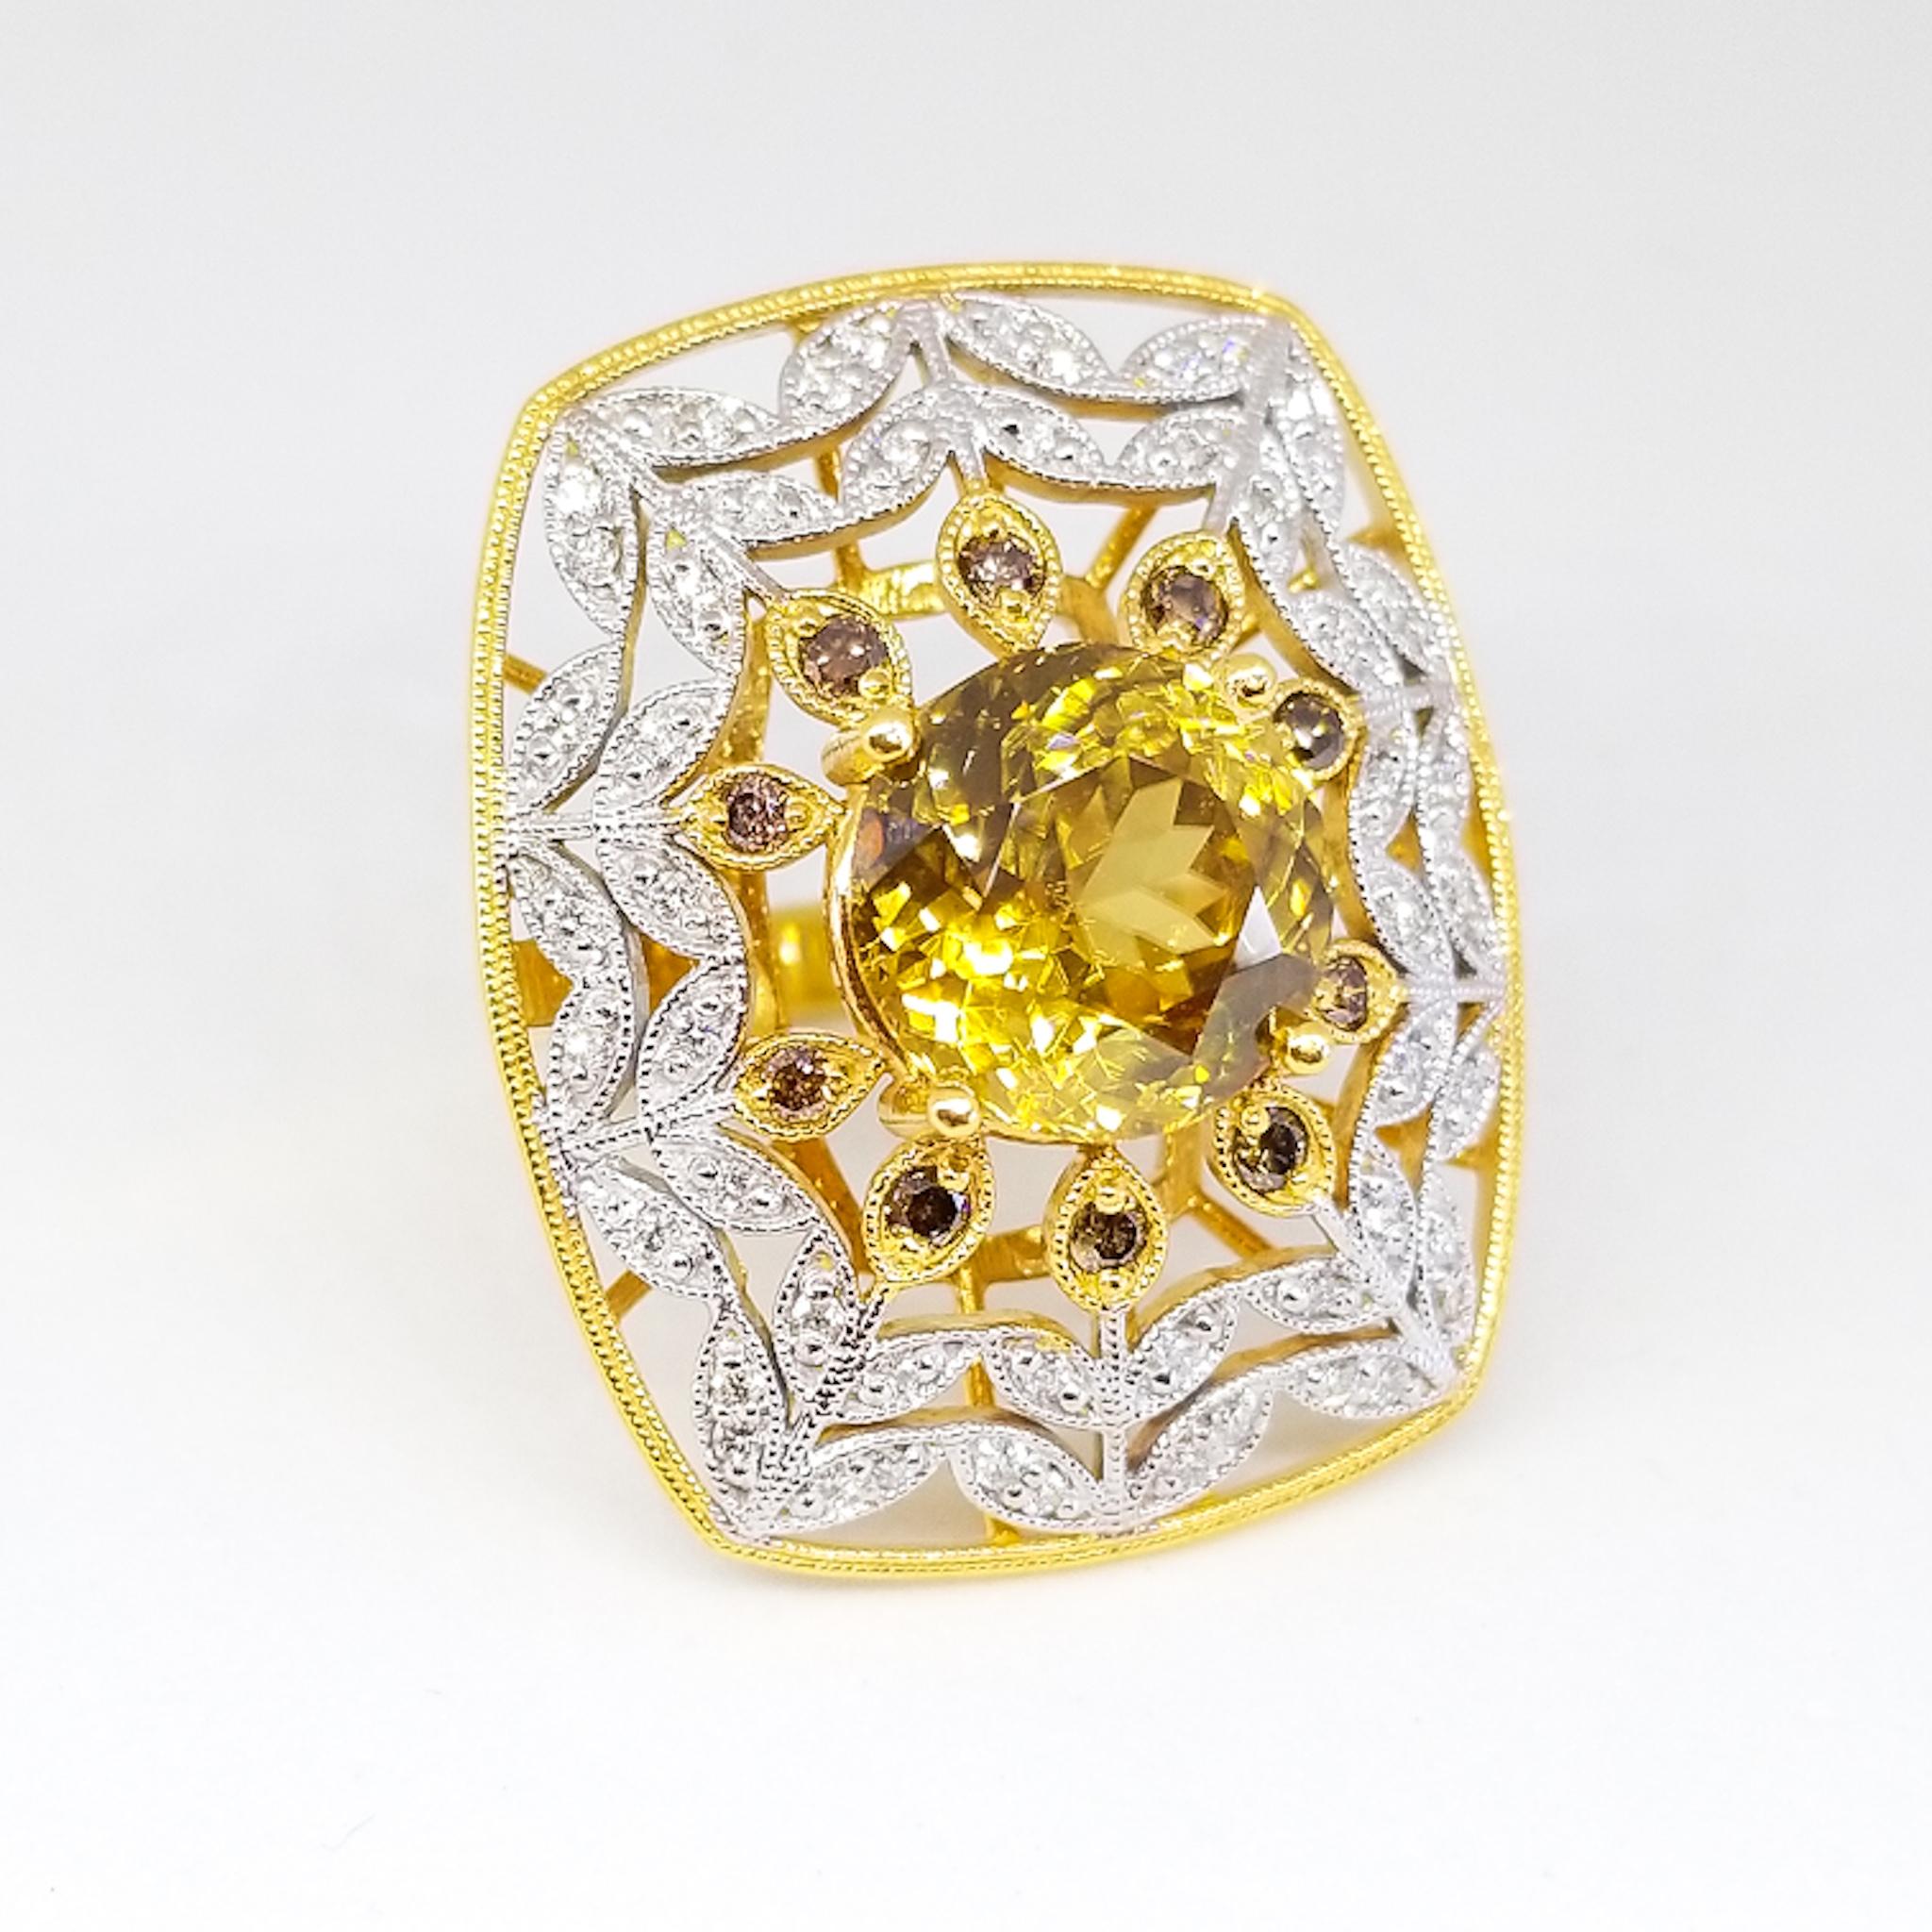 A 7.83 Carat Natural Fancy Zircon of Cognac / Champagne Color, Gem Clarity and Exceptional Cutting is the centerpiece of this magnificently large cocktail ring. The brilliant cut center stone of 11.07mm diameter by 6.84mm depth is prong set and is